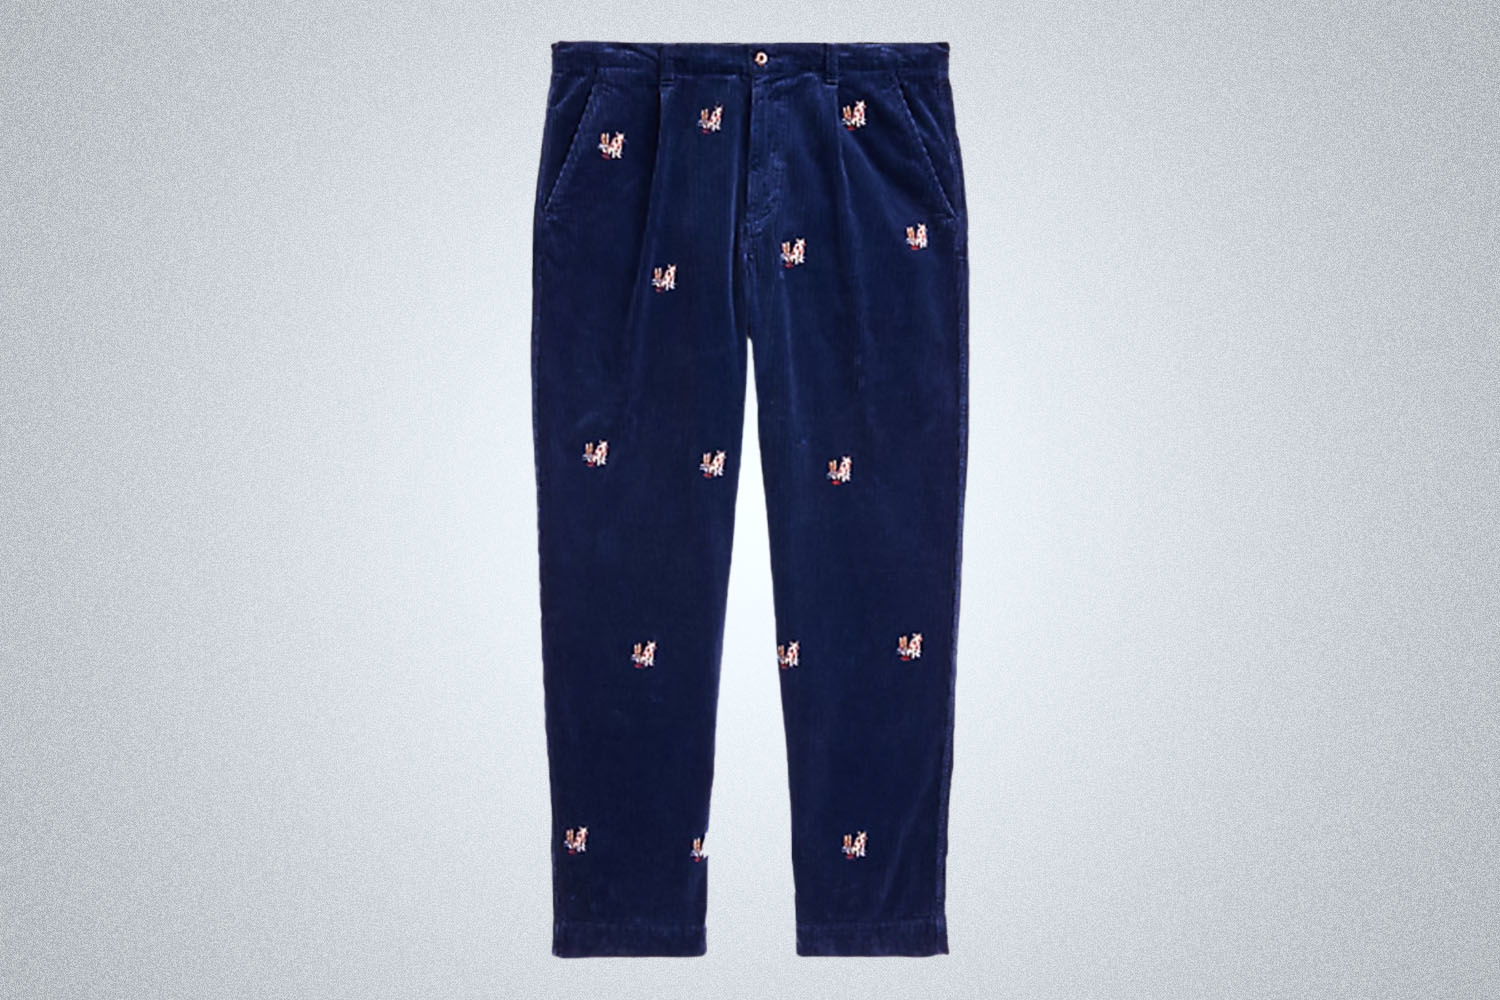 a pair of navy Polo ralph Lauren corduroy pants on a grey background